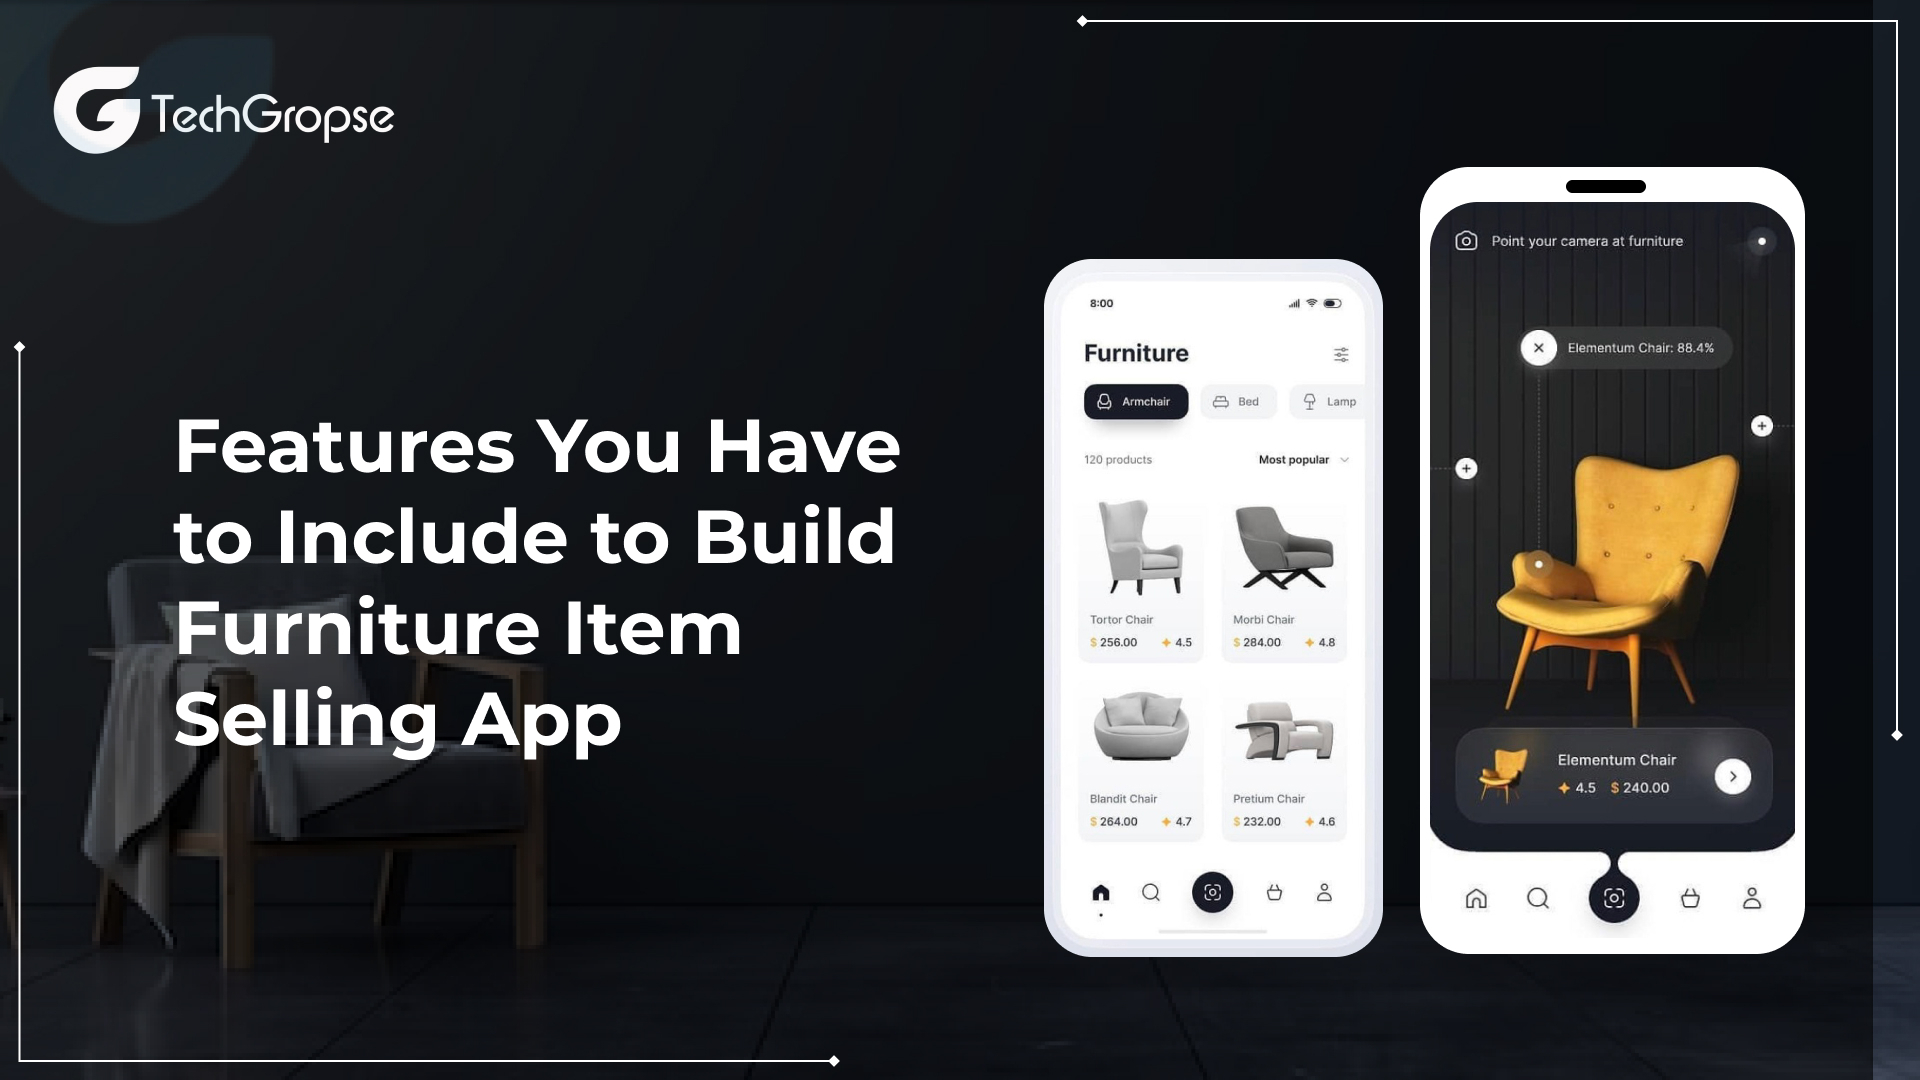 Features You Have to Include to Build Furniture Item Selling App